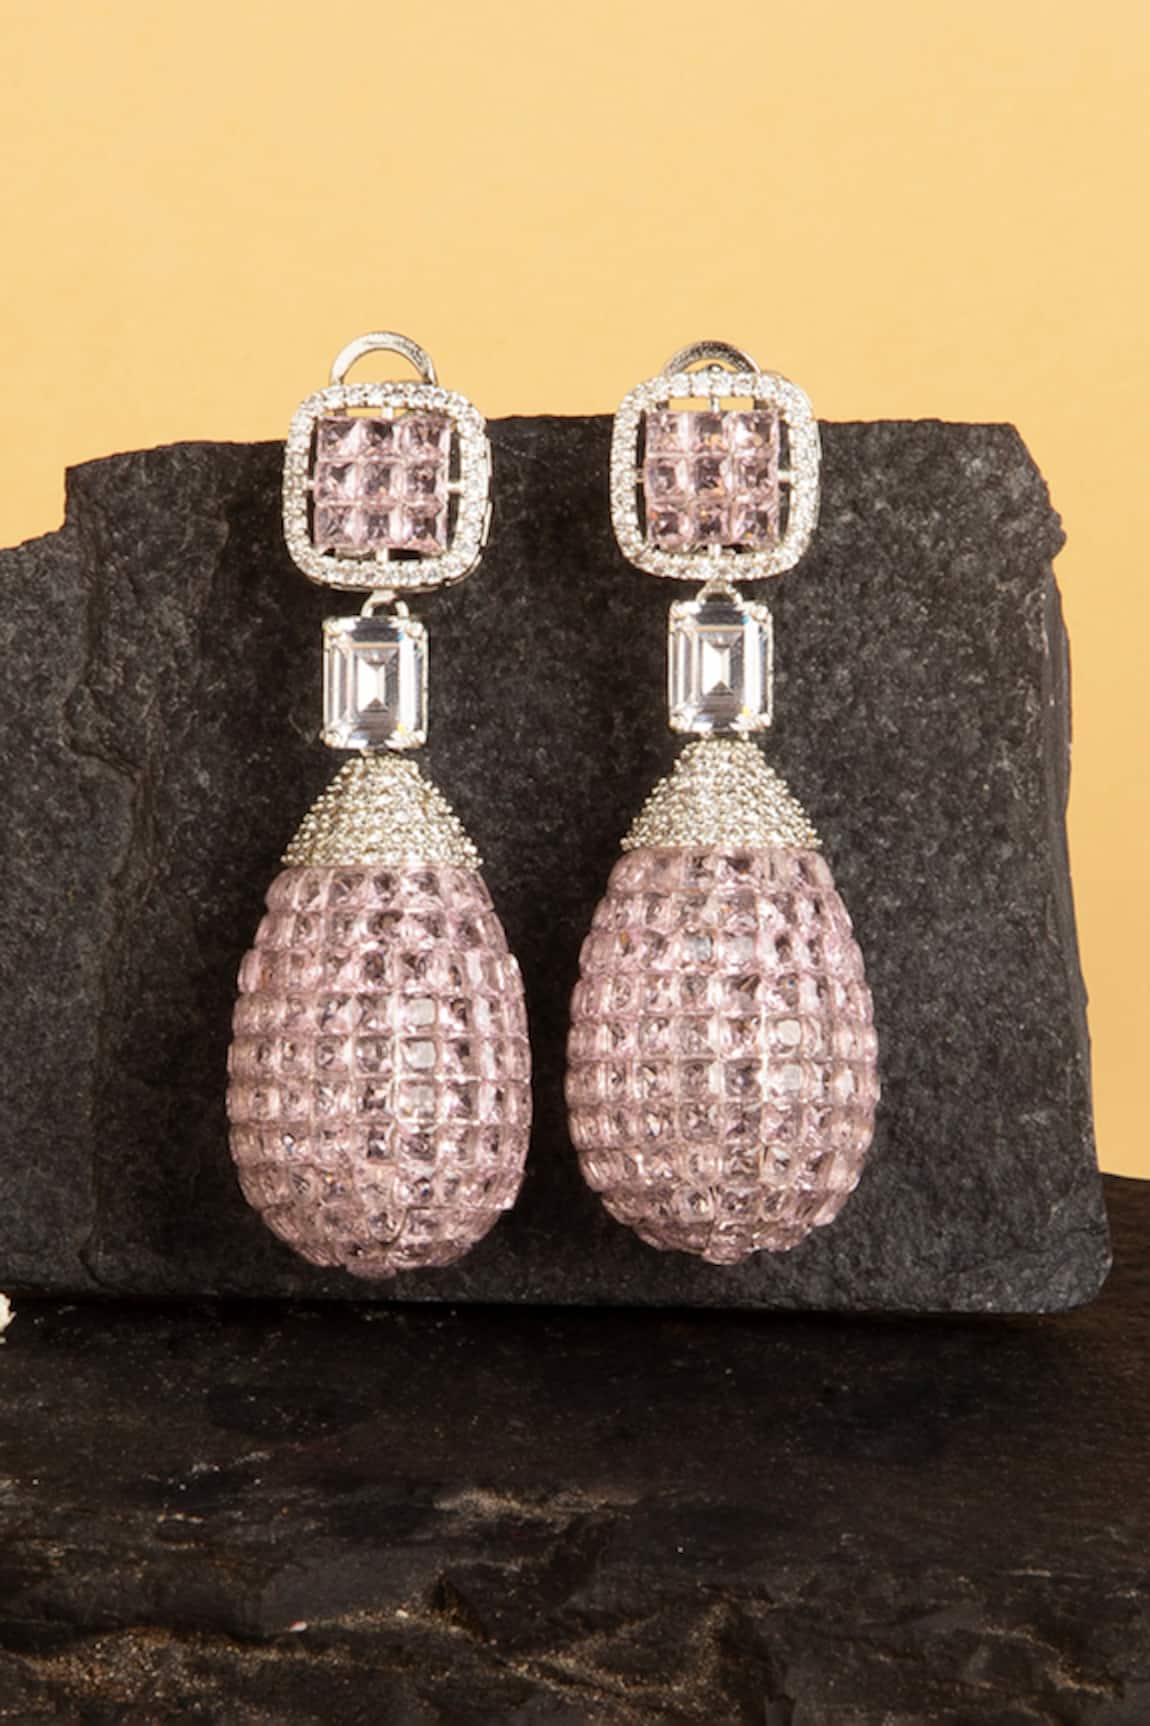 The Jewel Factor The Princess Embellished Earrings